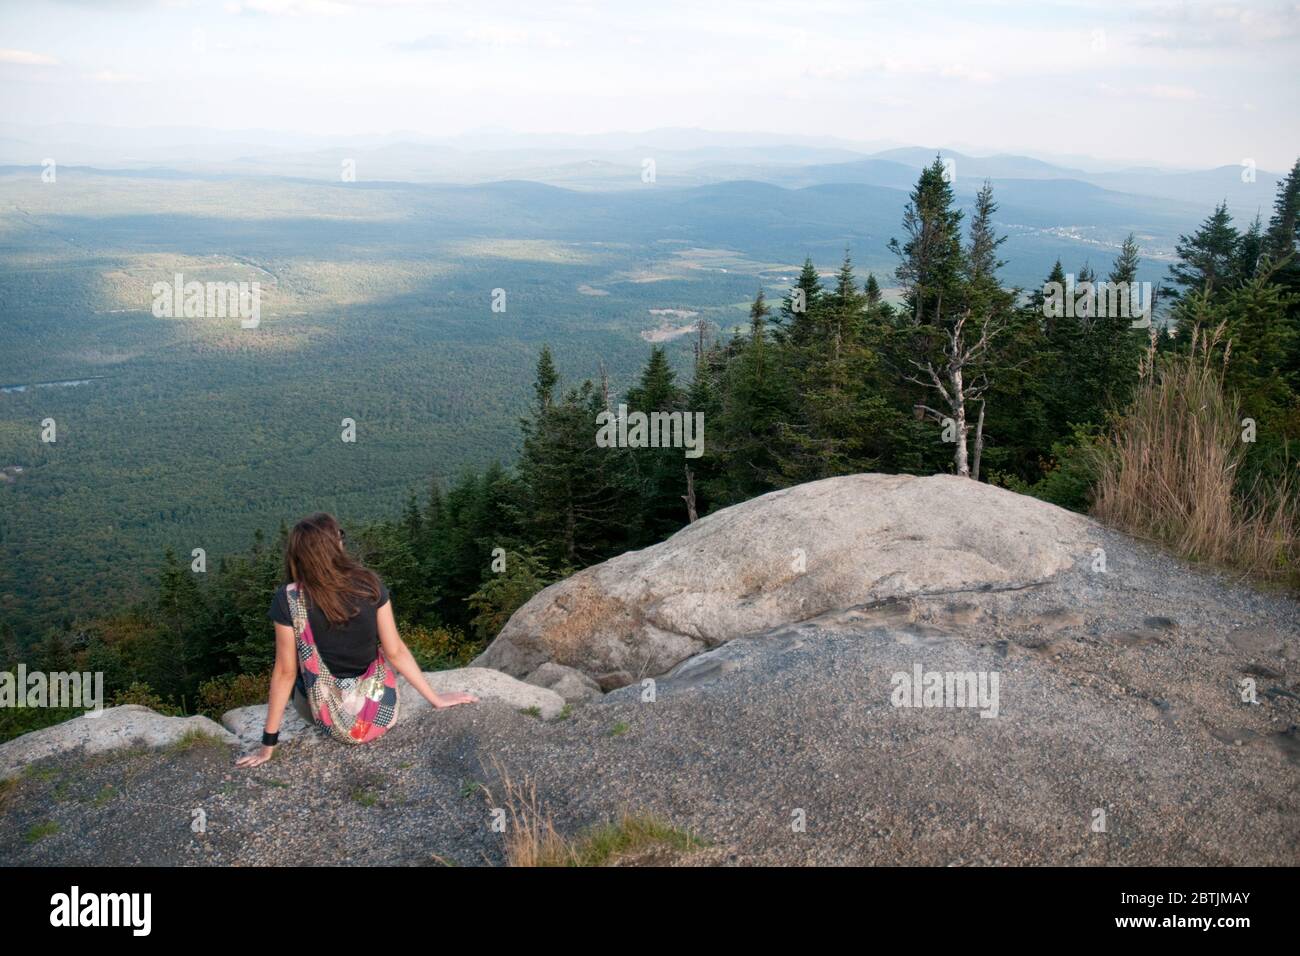 A hiker sitting on a rocky lookout in Mont Megantic National Park near Notre Dame des Bois in Estrie, Appalachia, Eastern Townships, Quebec, Canada. Stock Photo